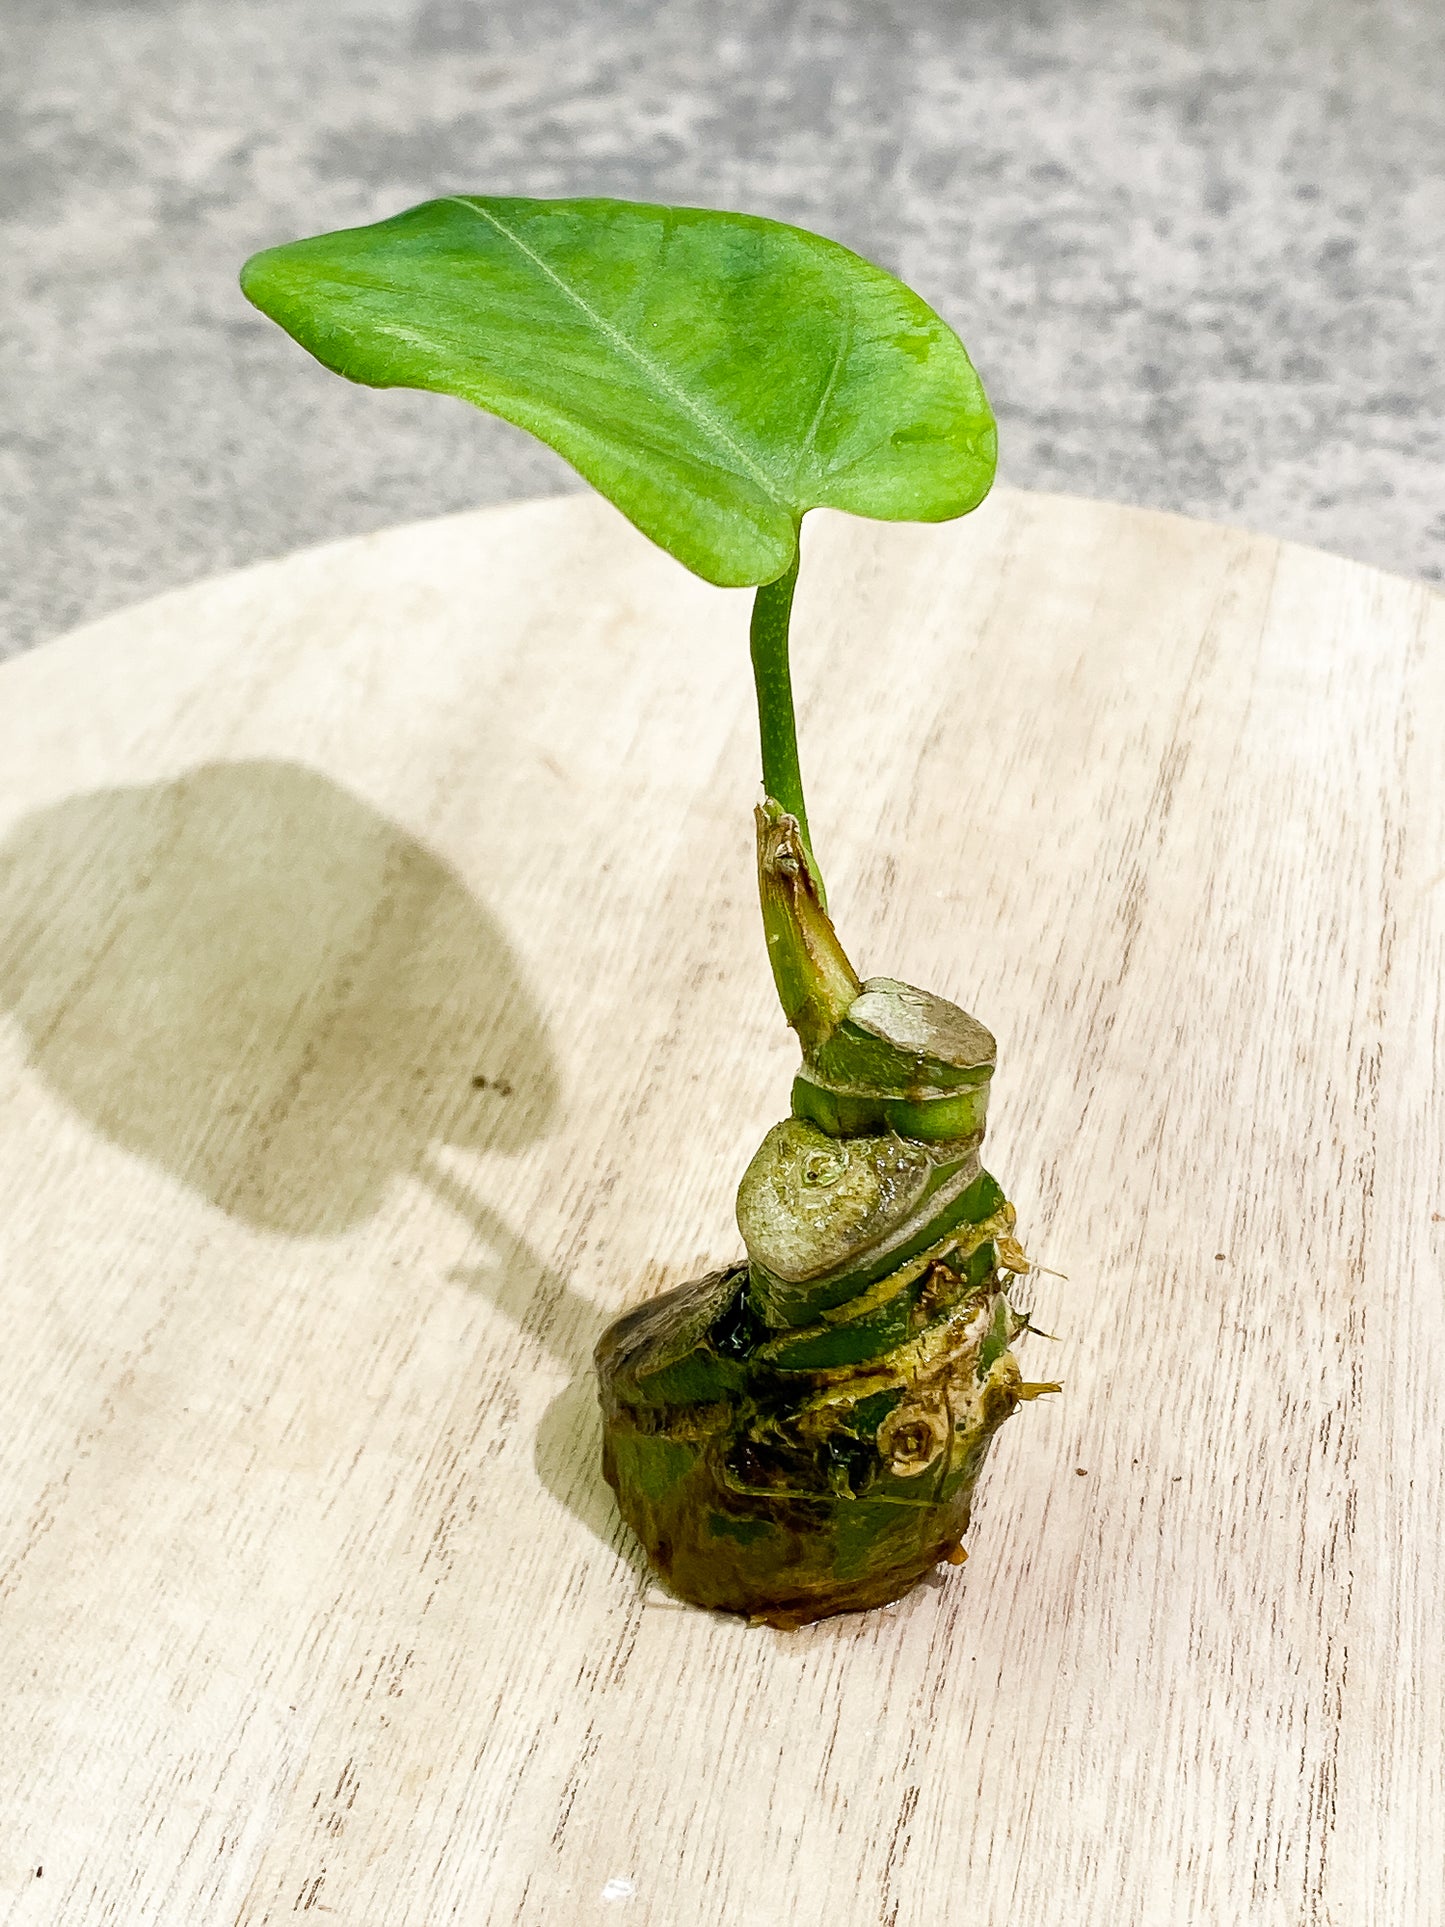 Anthurium Cirinoi unrooted chonk with 1 leaf and 1 extra small sprout